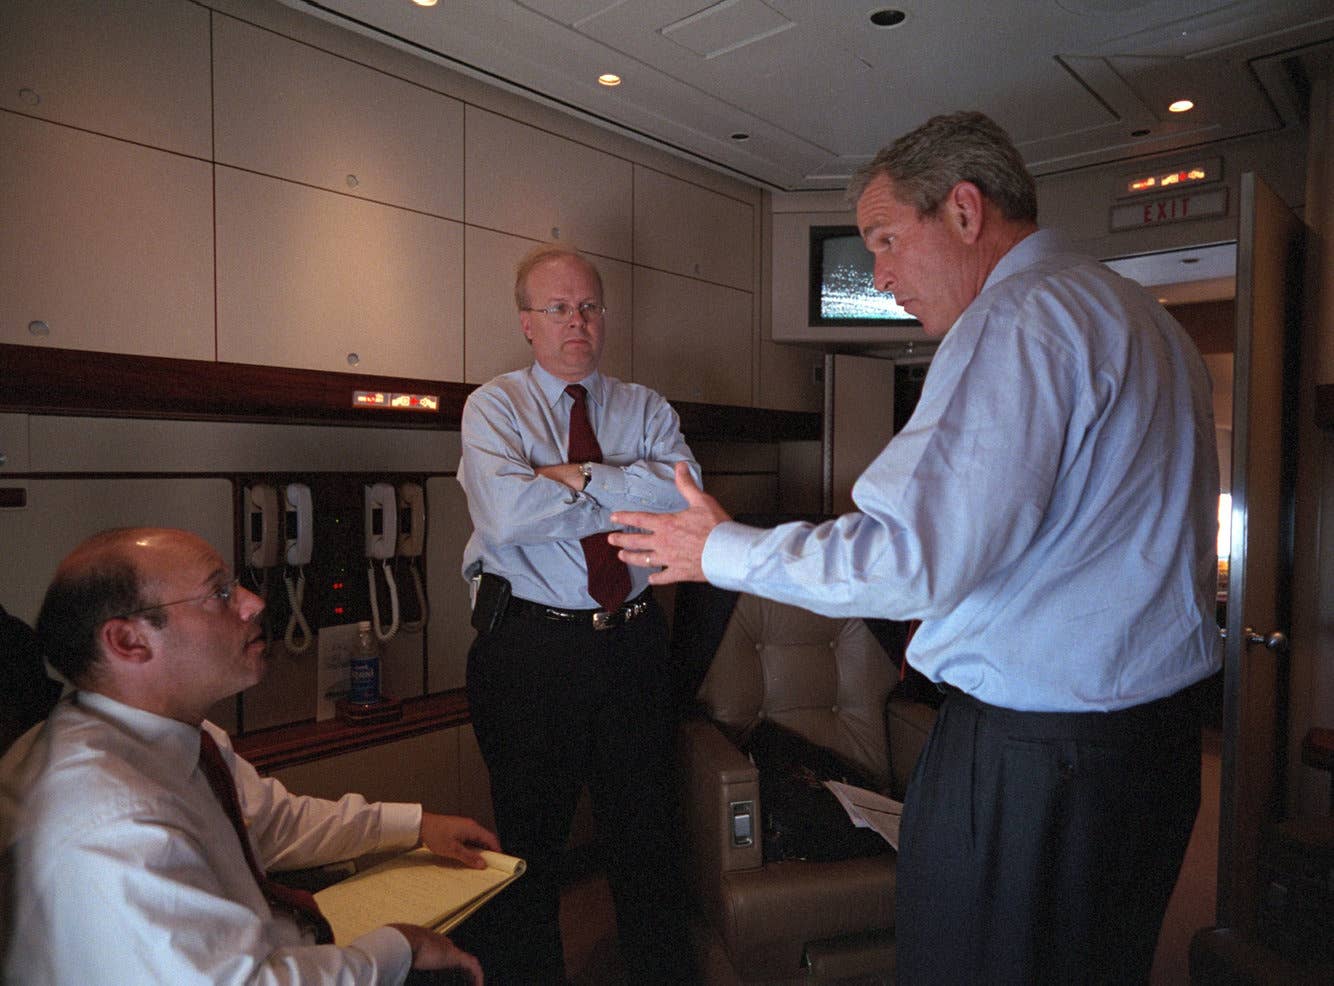 Photos show moment President George W. Bush learned of the 9/11 attacks